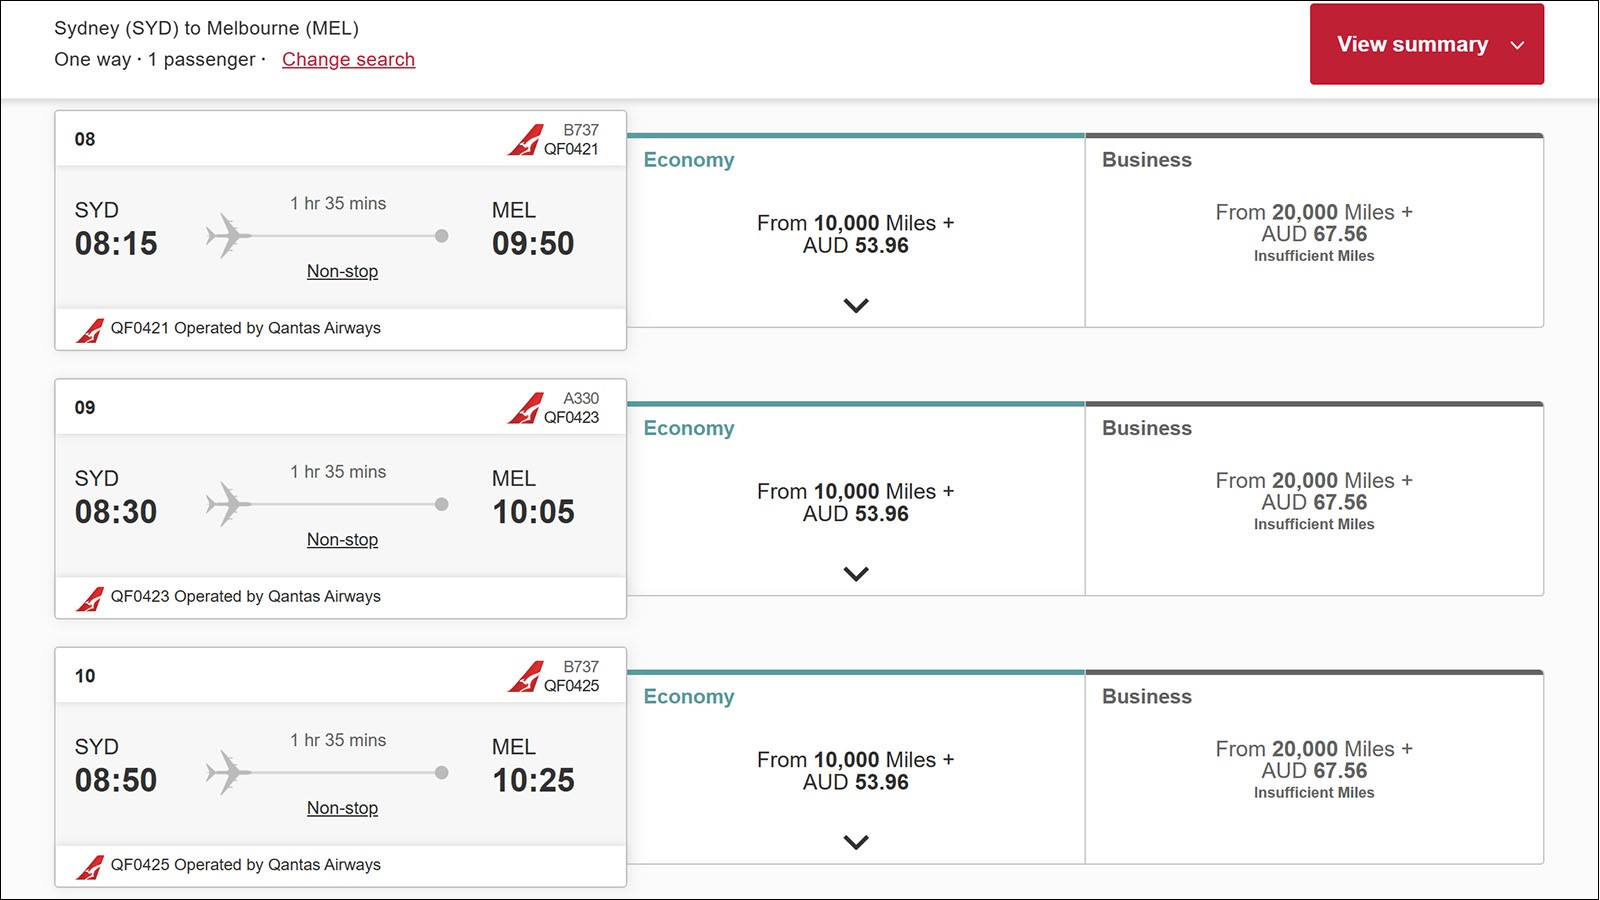 Booking page for Qantas flights using Emirates Skywards miles, including those earned via the airline's Mall